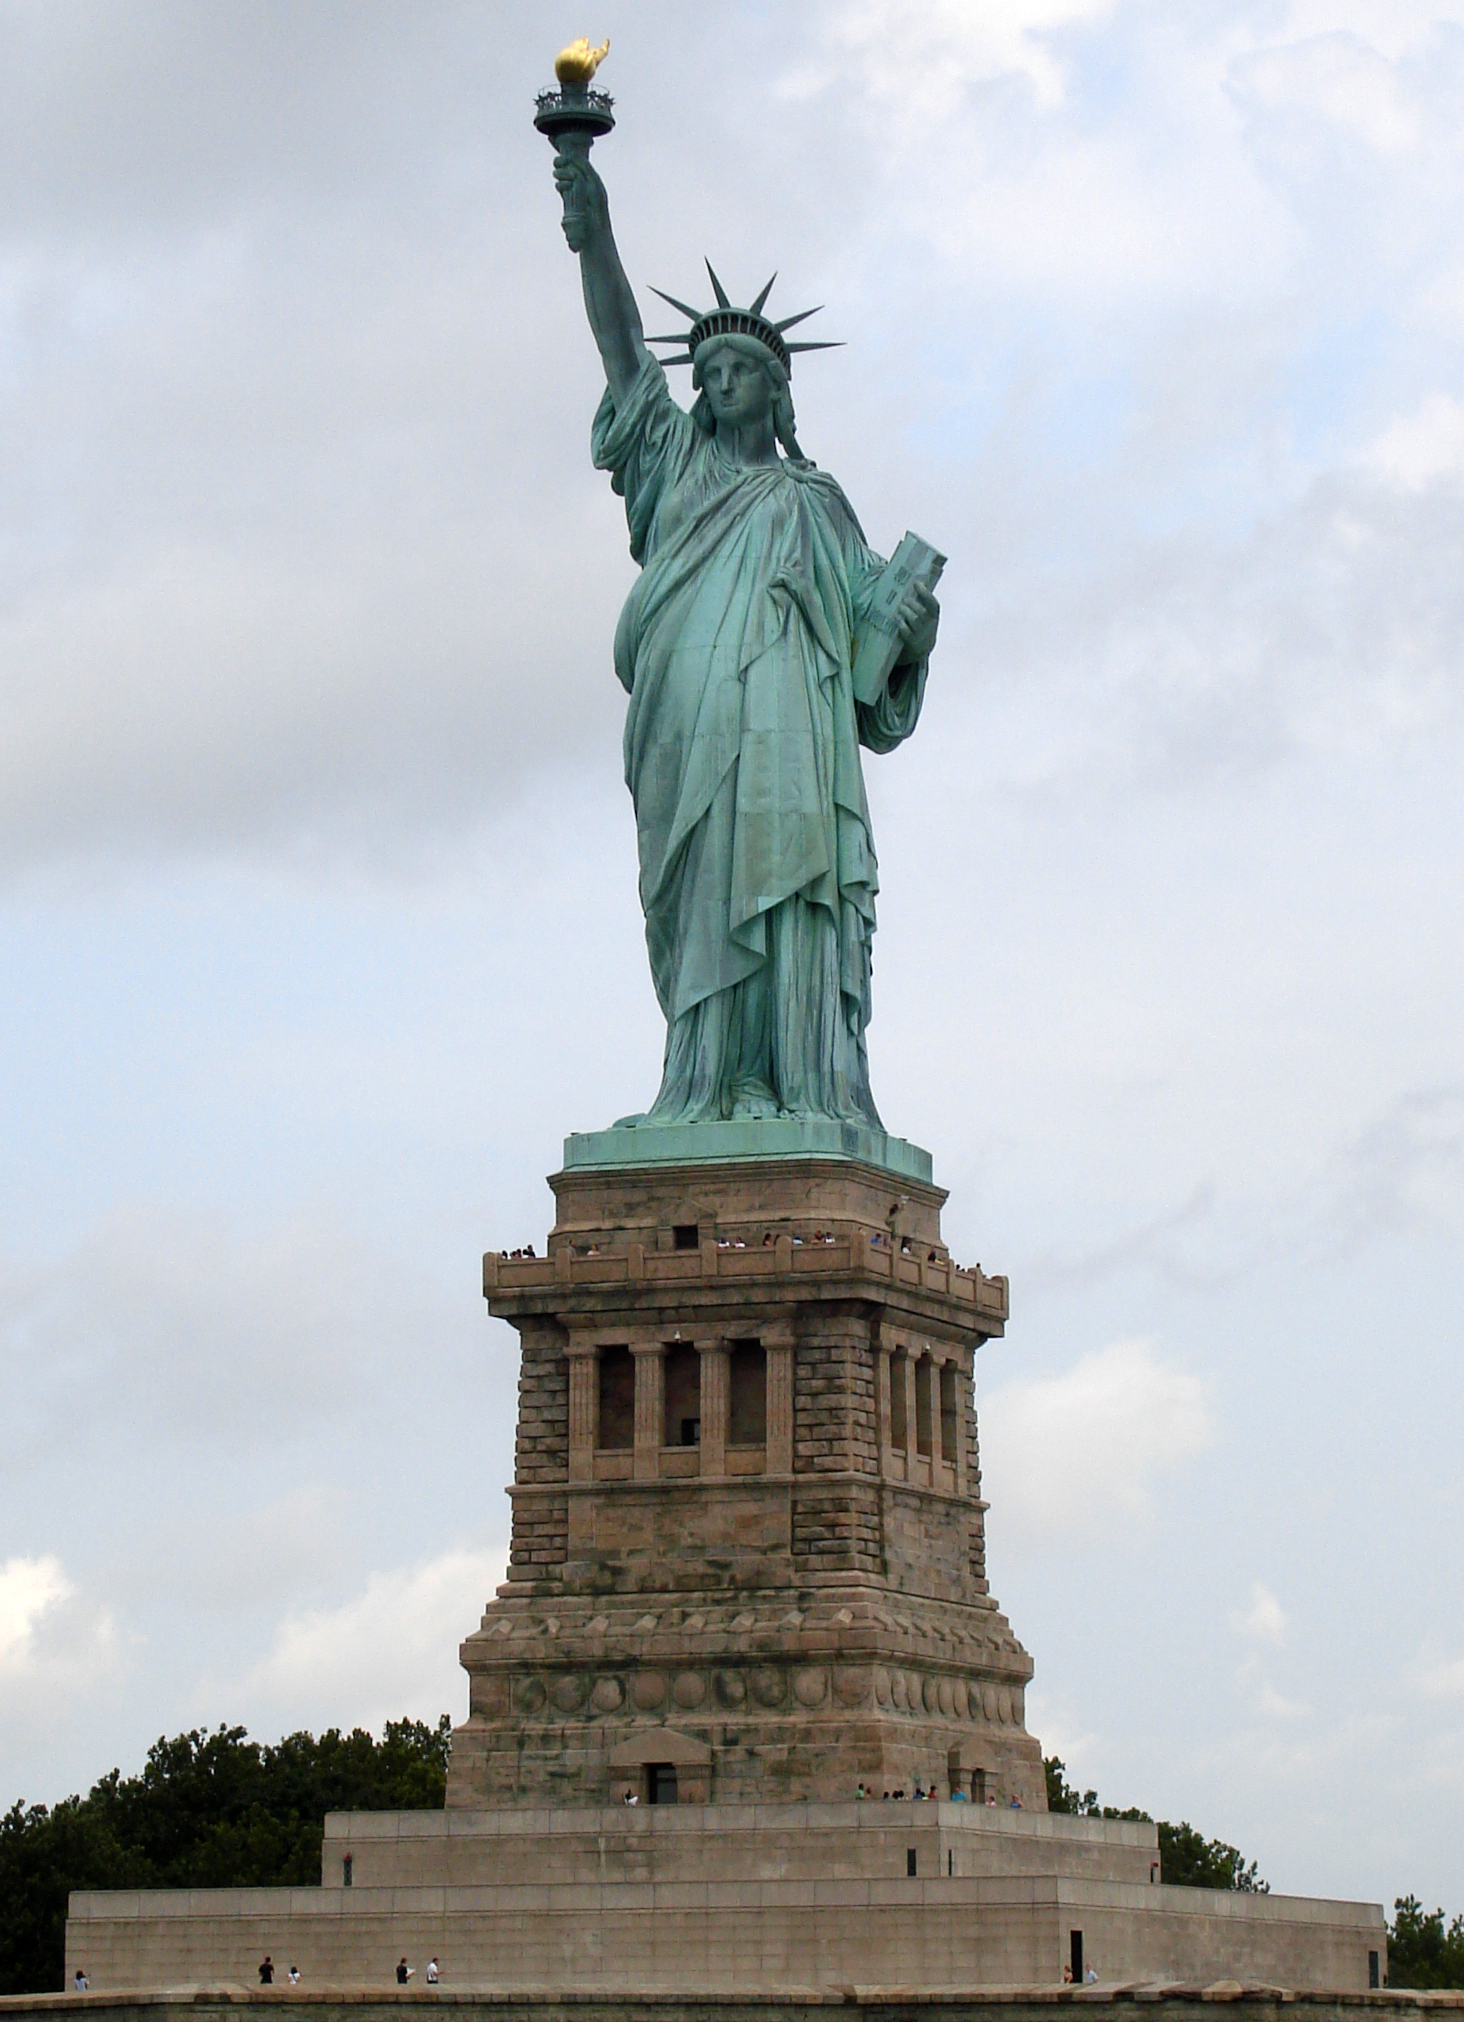 Statue of Liberty by Elcobbobla on Wikimedia